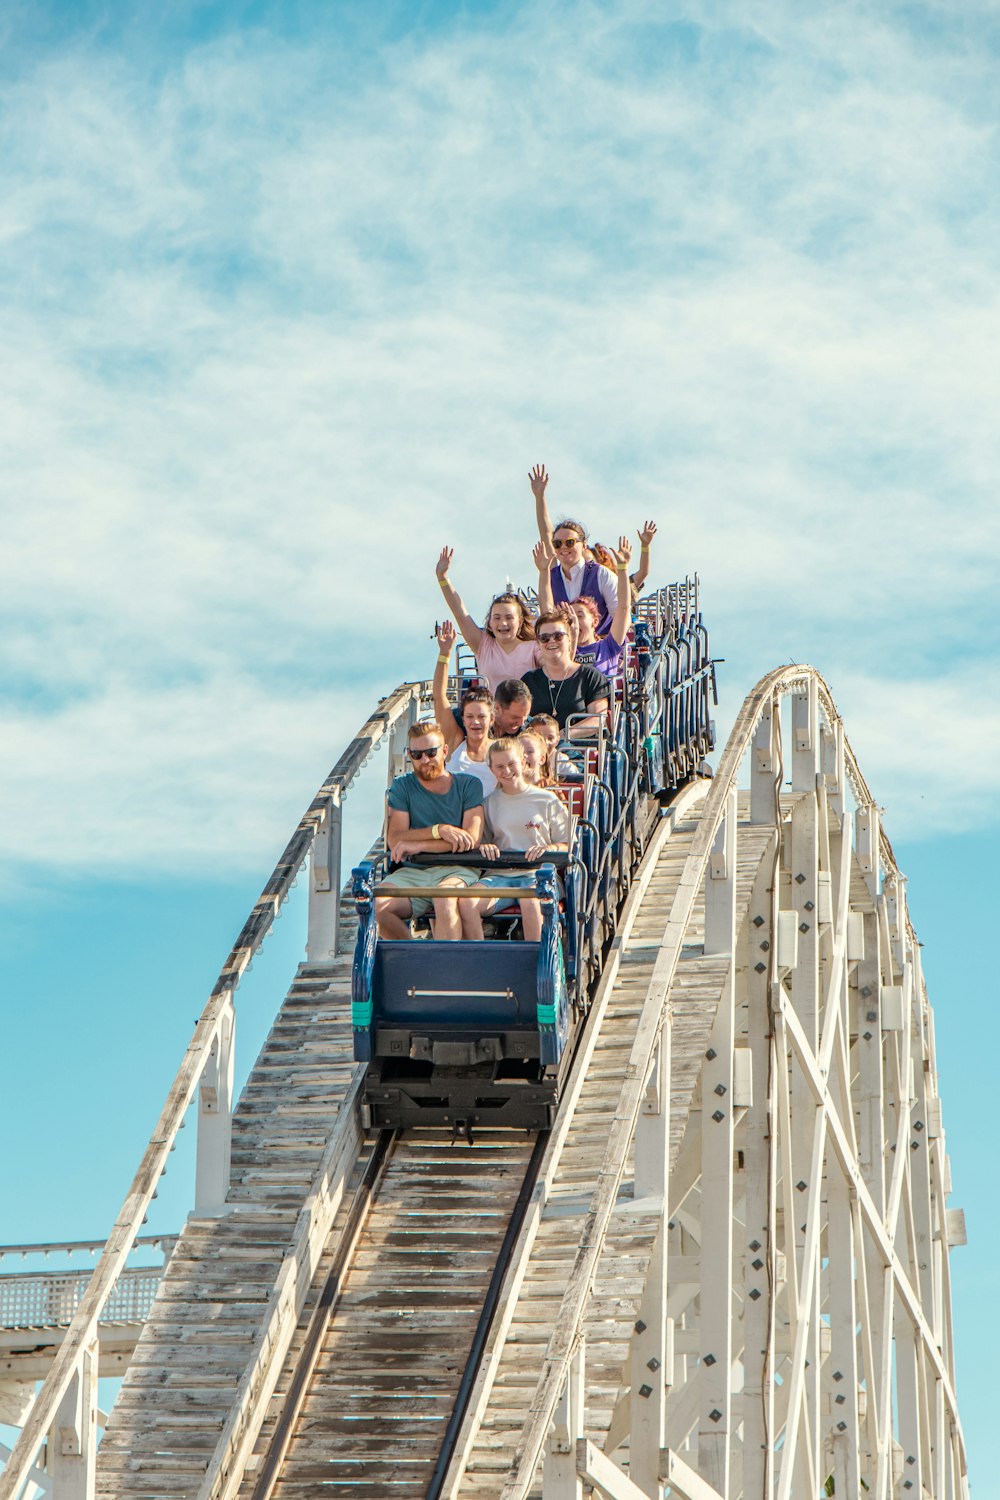 750+ Roller Coaster Pictures [HD]